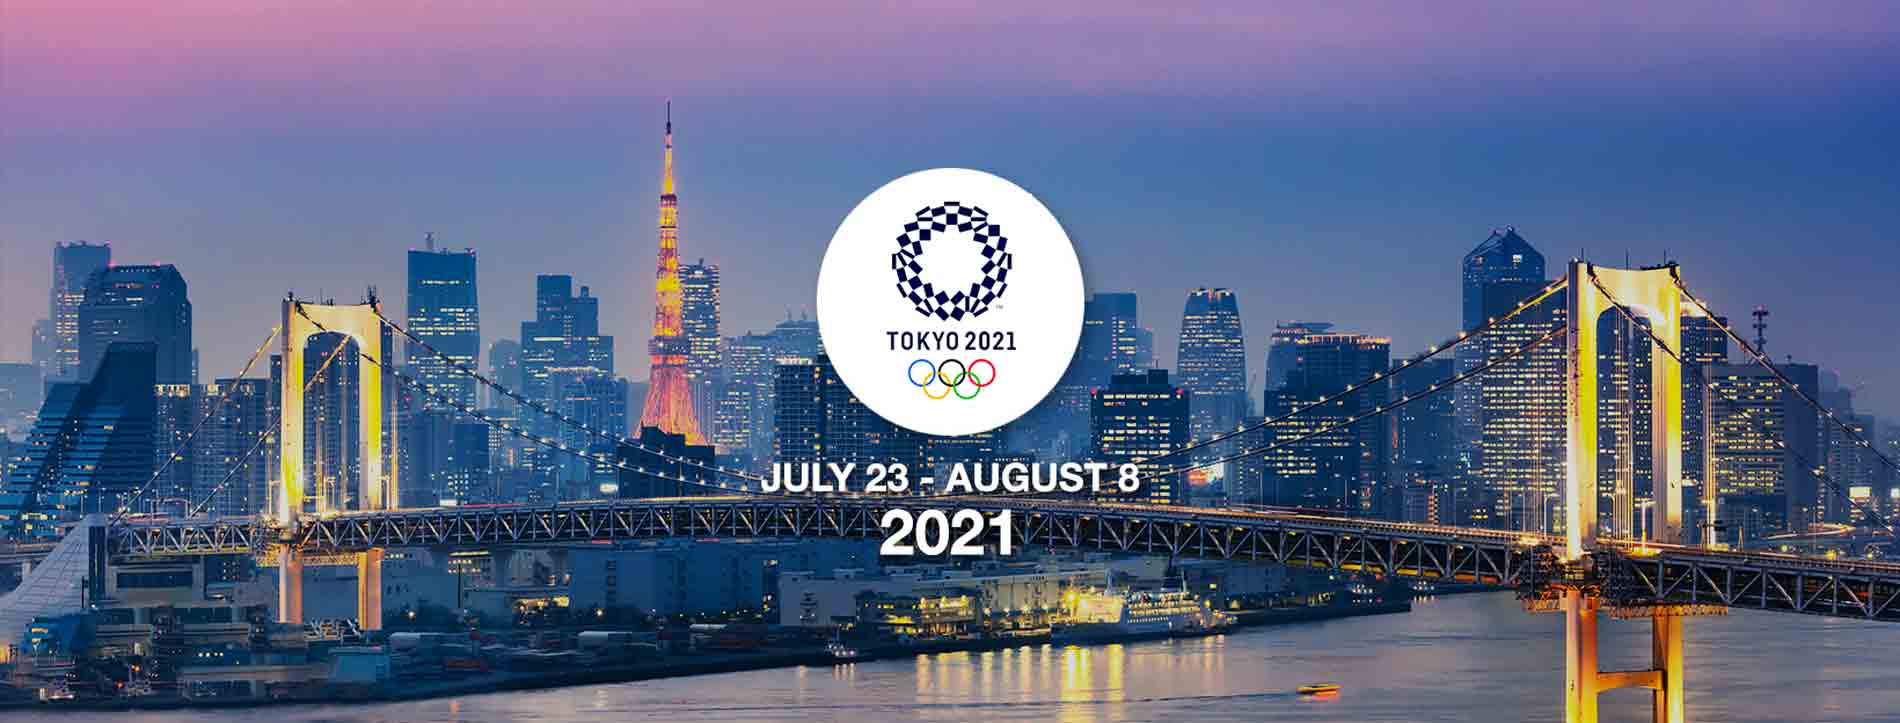 Olympic Games Tokyo 2021 Agripp